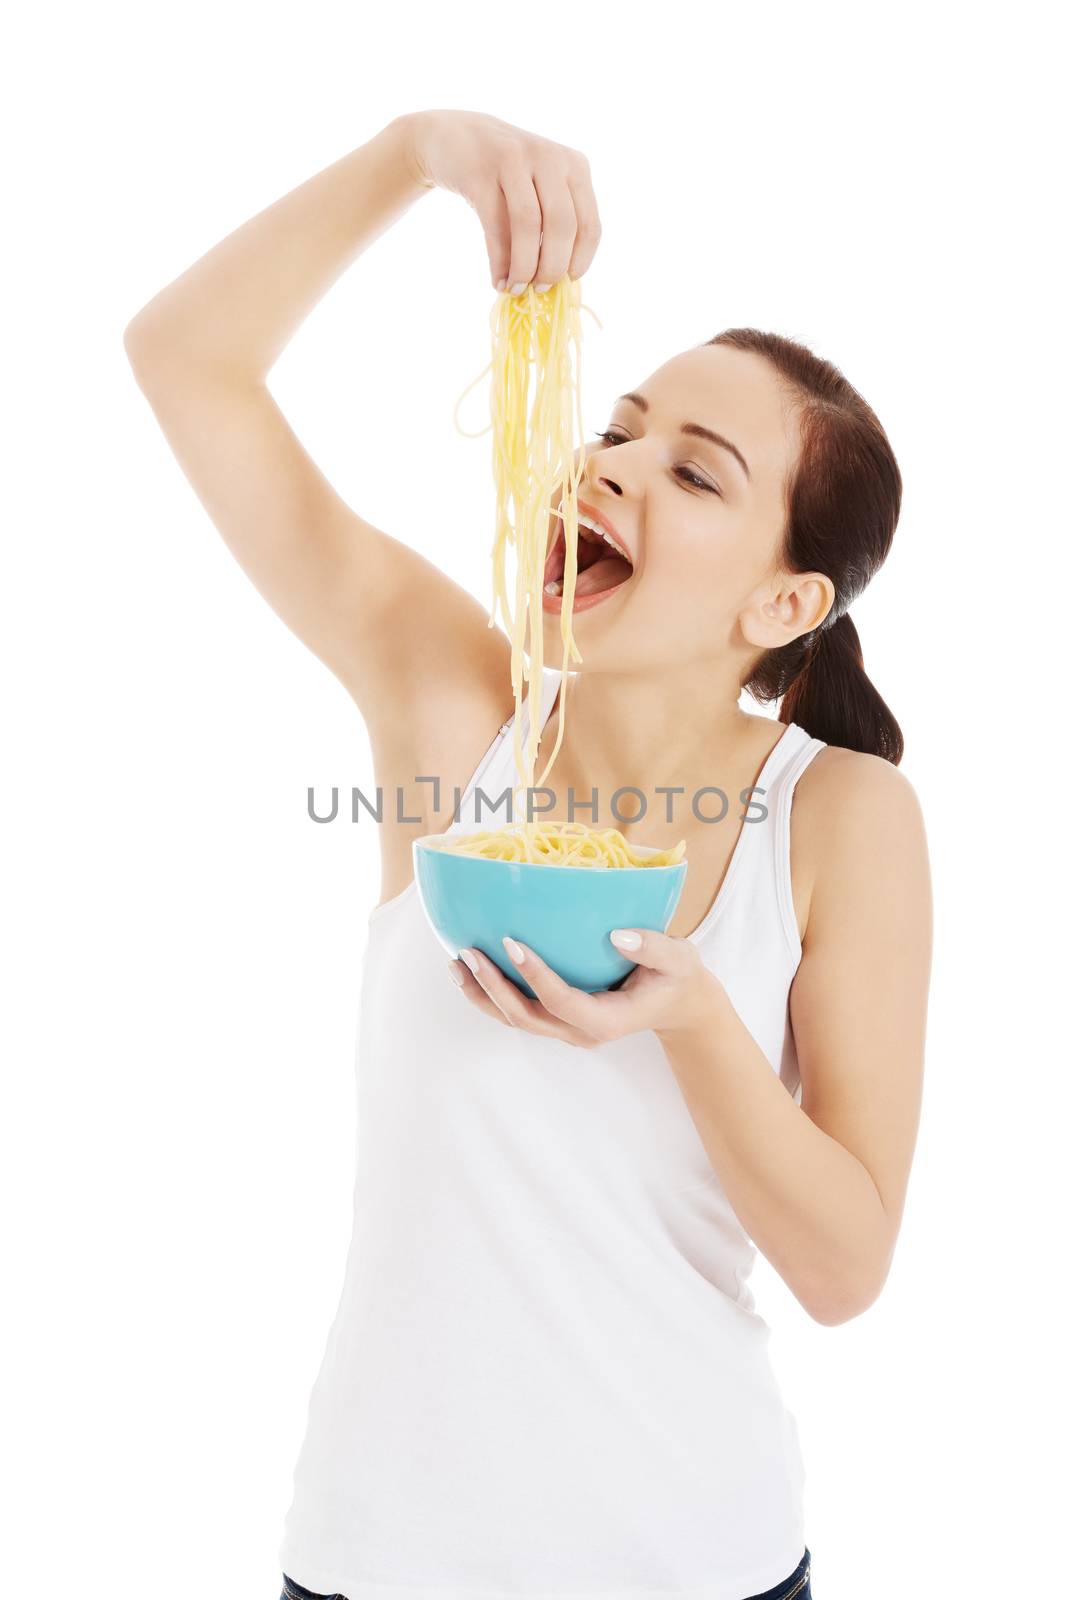 Beautiful woman eating pasta from a bowl. Isolated on white.